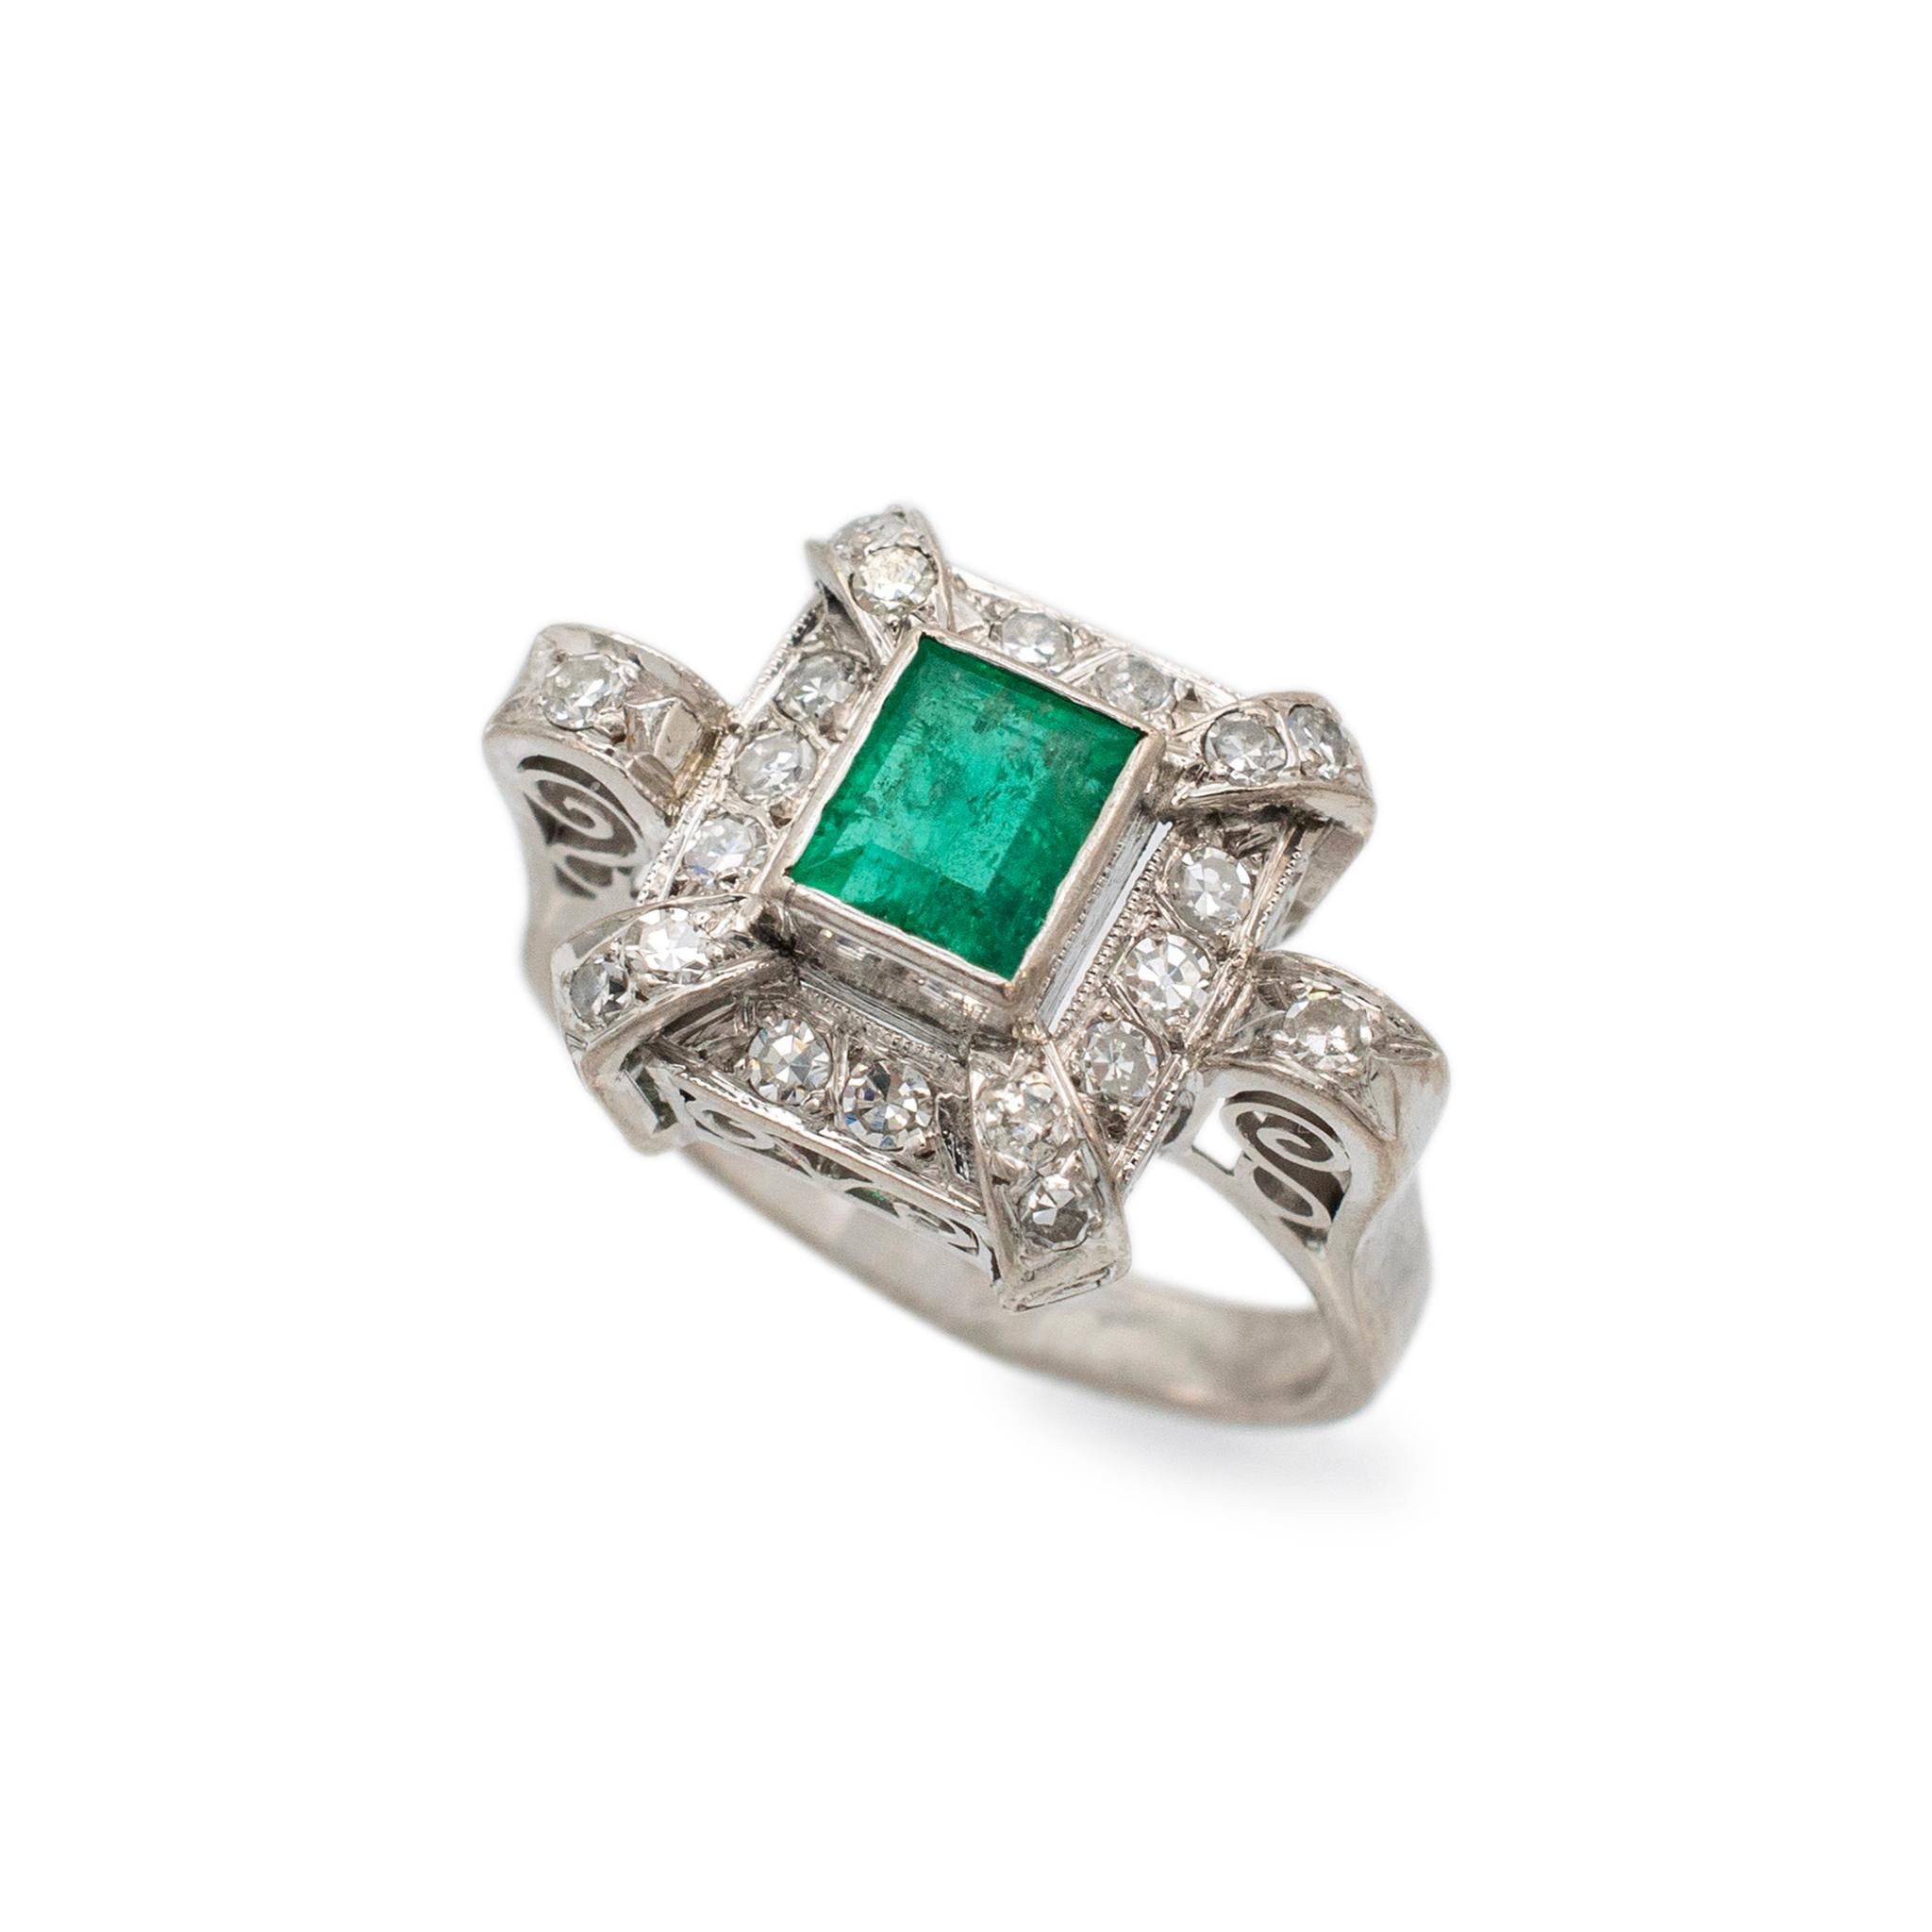 Gender: Ladies

Ring Size: 6

Metal Types: Gold, Silver and Palladium

Weight: 4.15 grams

Ladies handmade filigreed palladium, silver and yellow gold, diamond and emerald antique cocktail ring with a half round shank. The metals were tested and